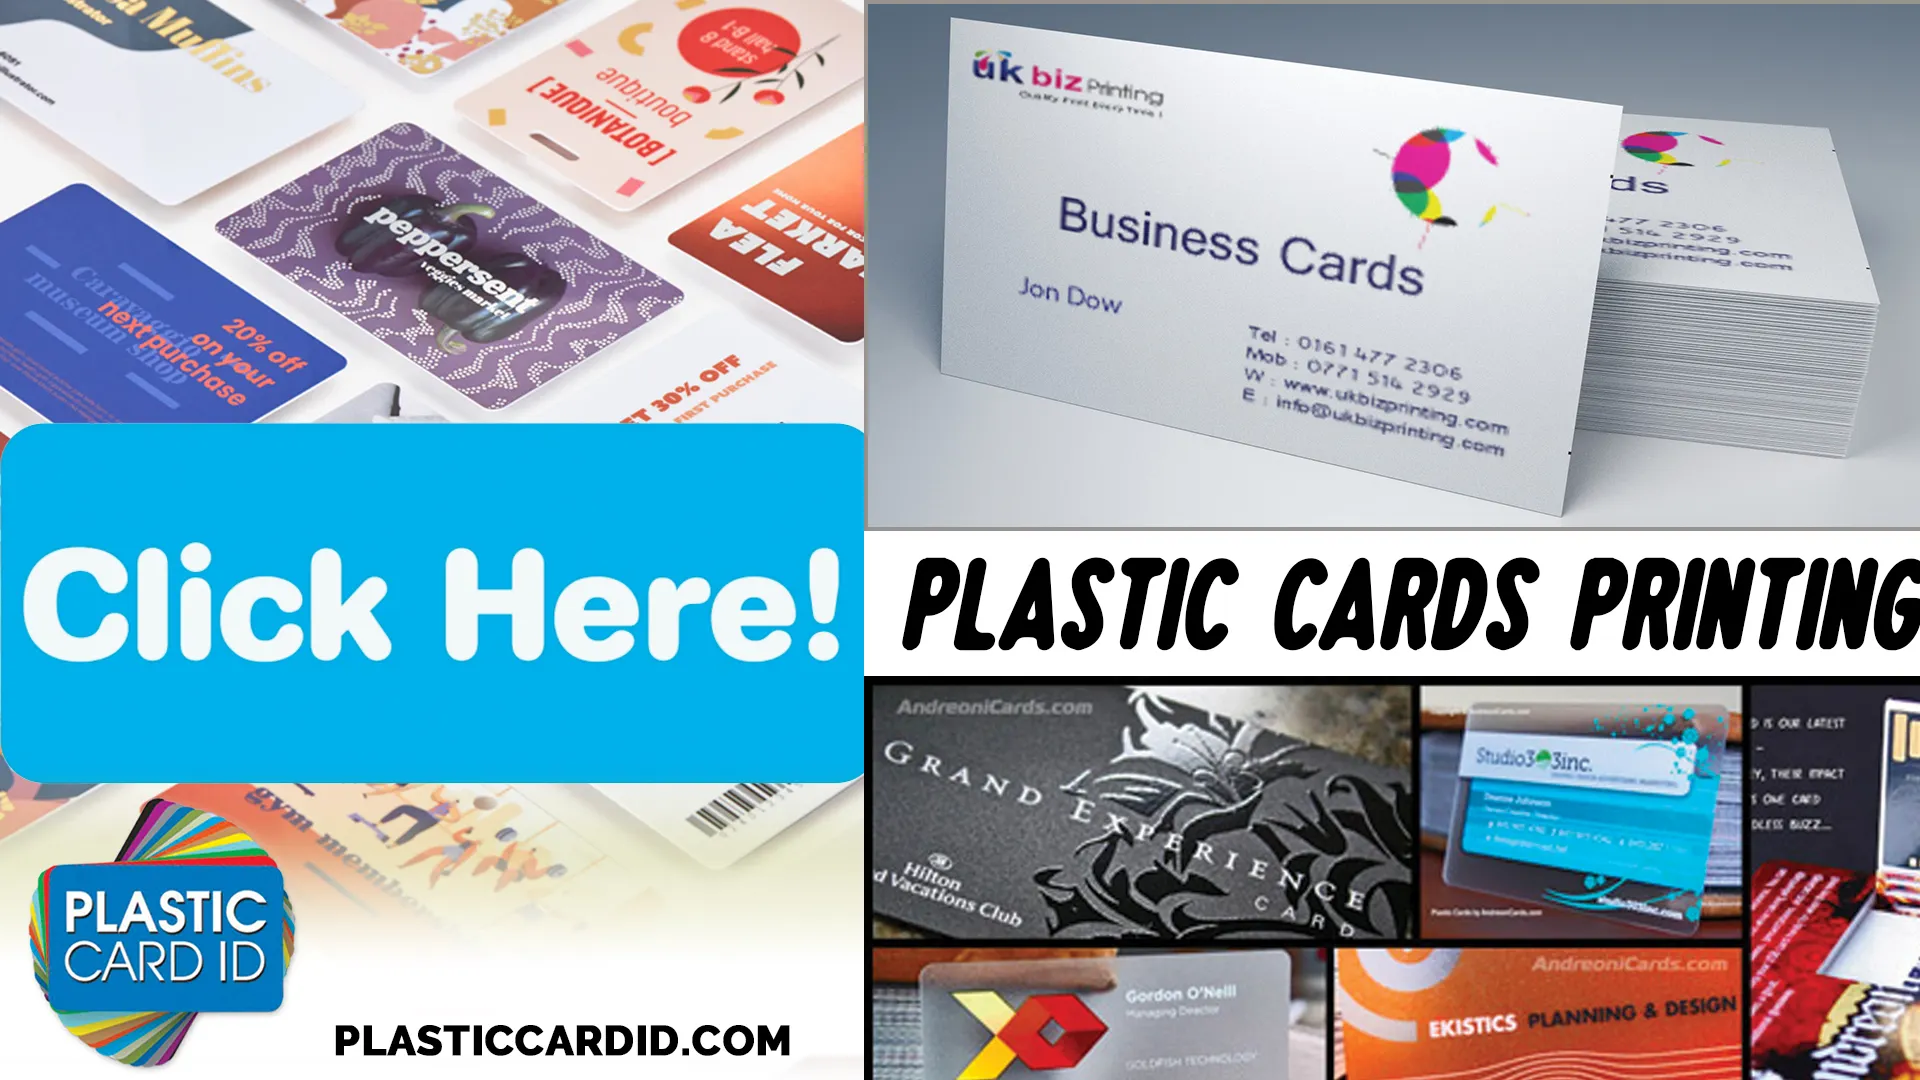 Making a Sustainable Impact: Eco-Friendly Plastic Cards